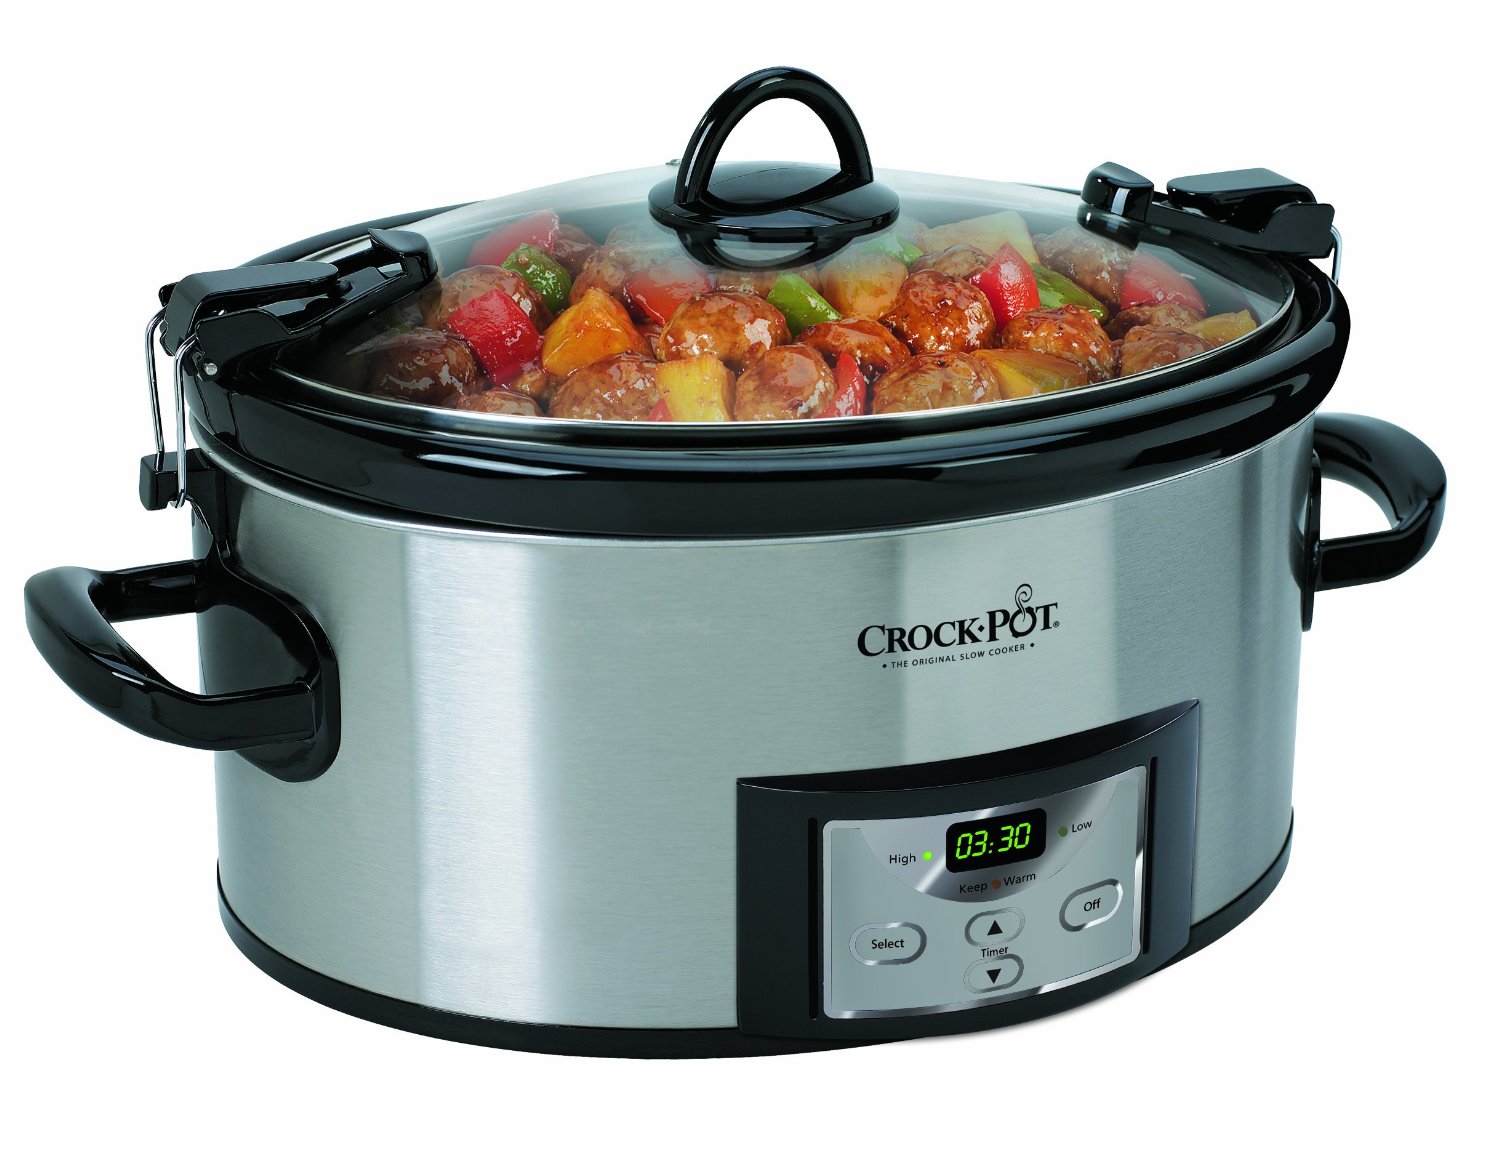 Crock pot programmable cook & carry oval slow cooker